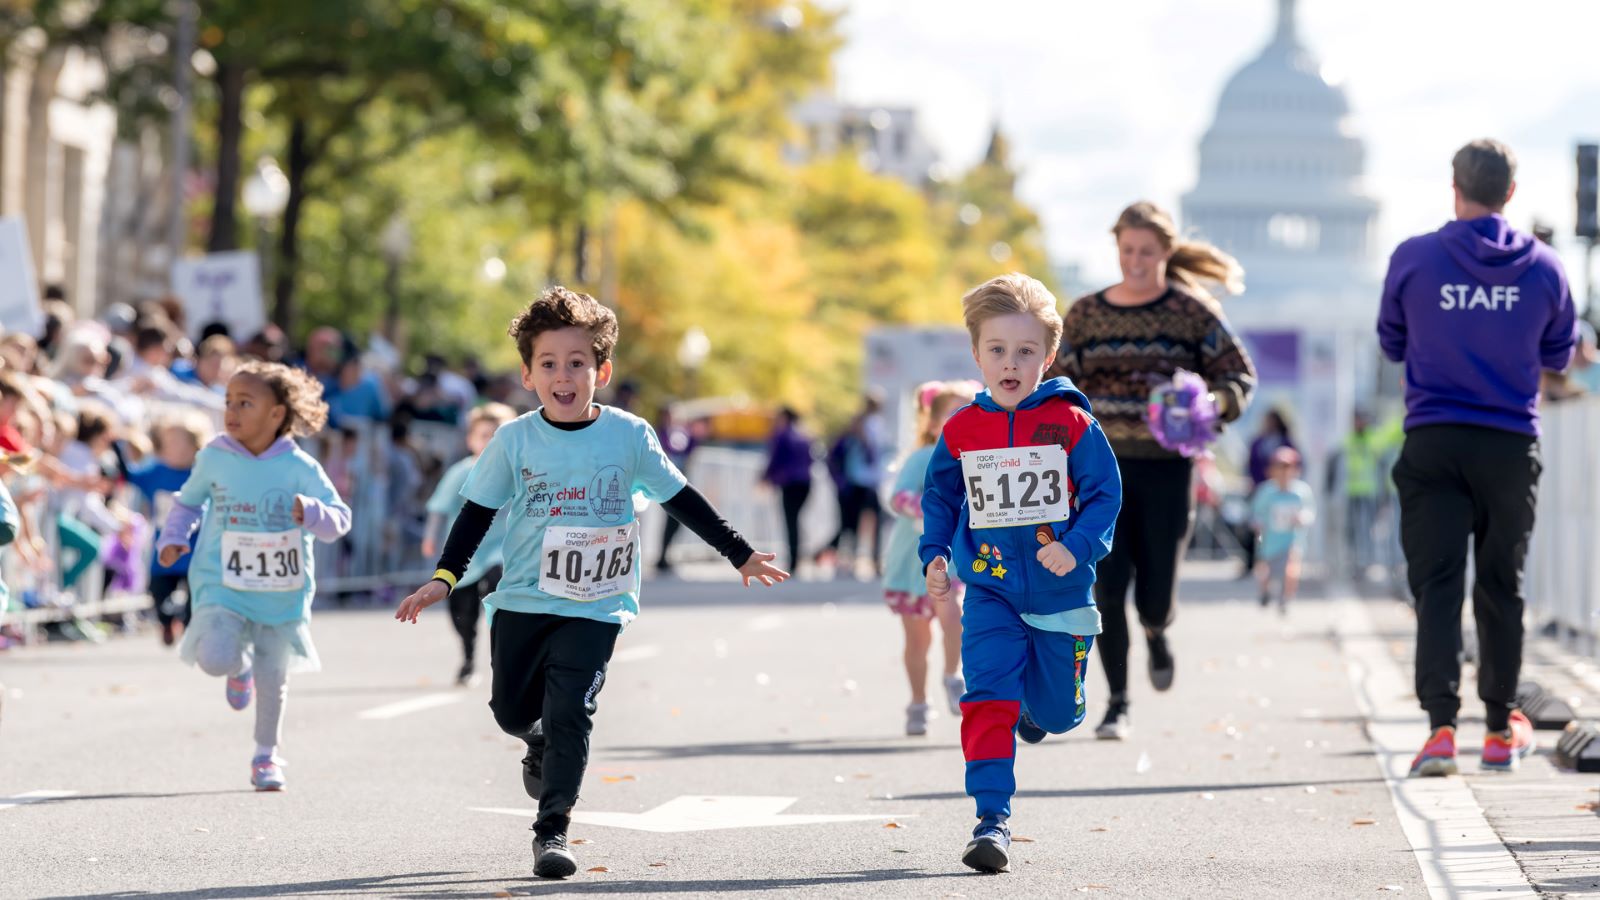 Children participating in the Race for Every Child